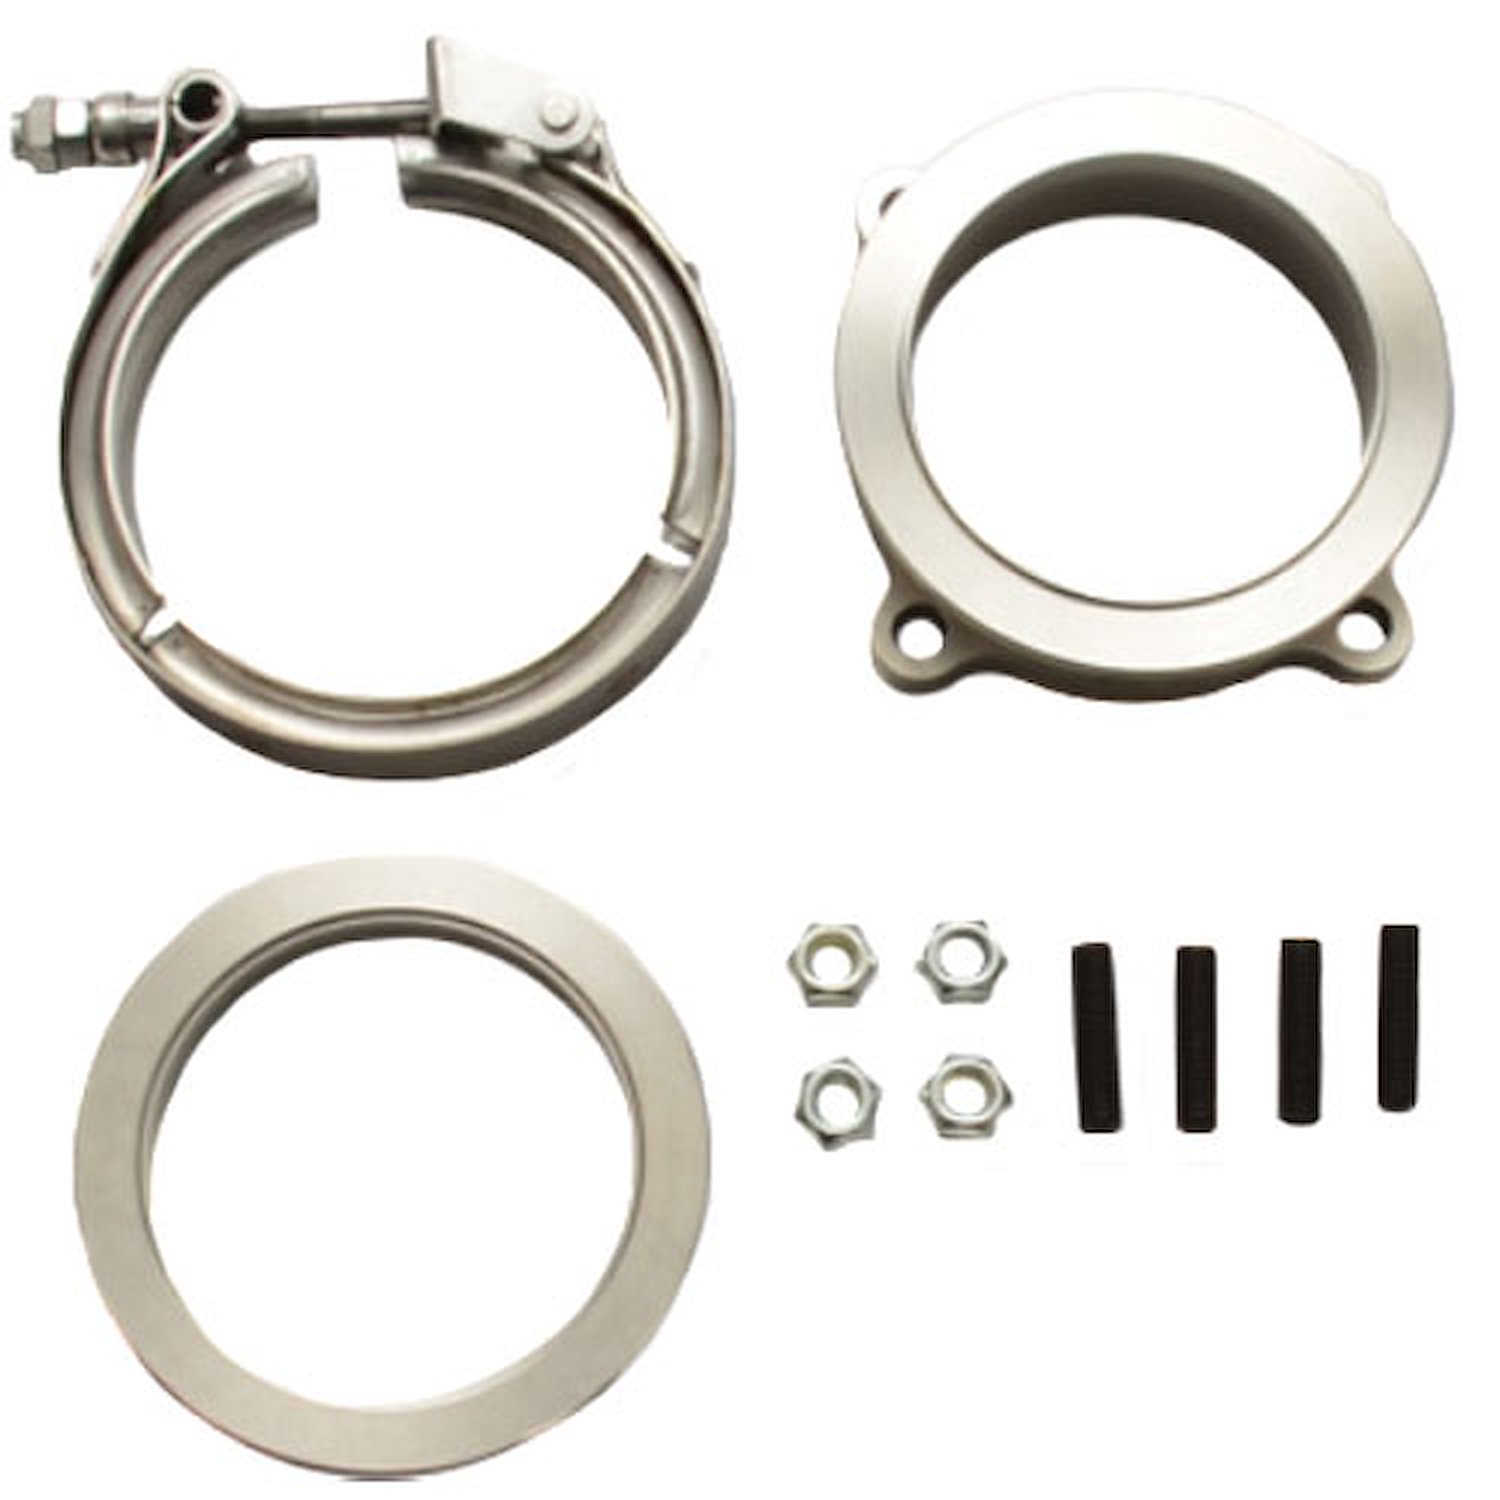 GT Series Turbo Flange Adapter Kit T304 Stainless Steel Includes: